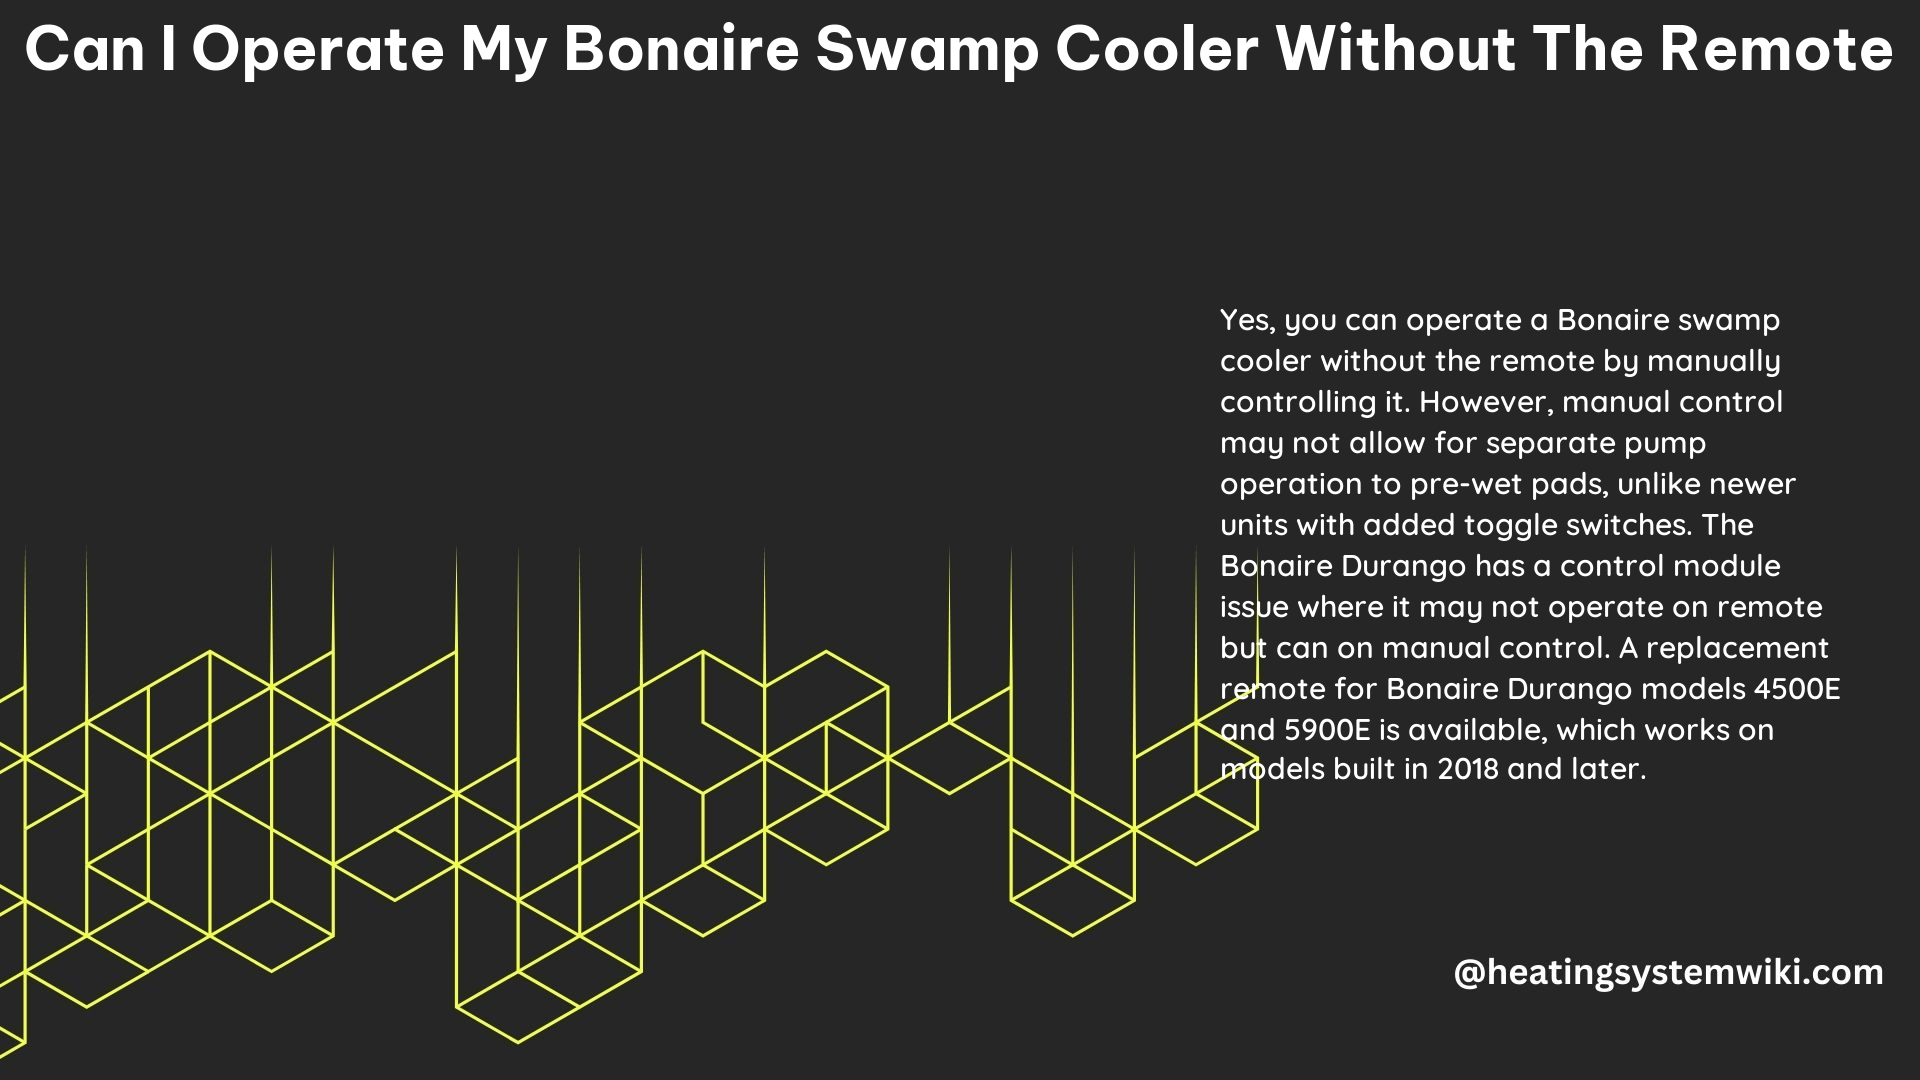 Can I Operate My Bonaire Swamp Cooler Without the Remote